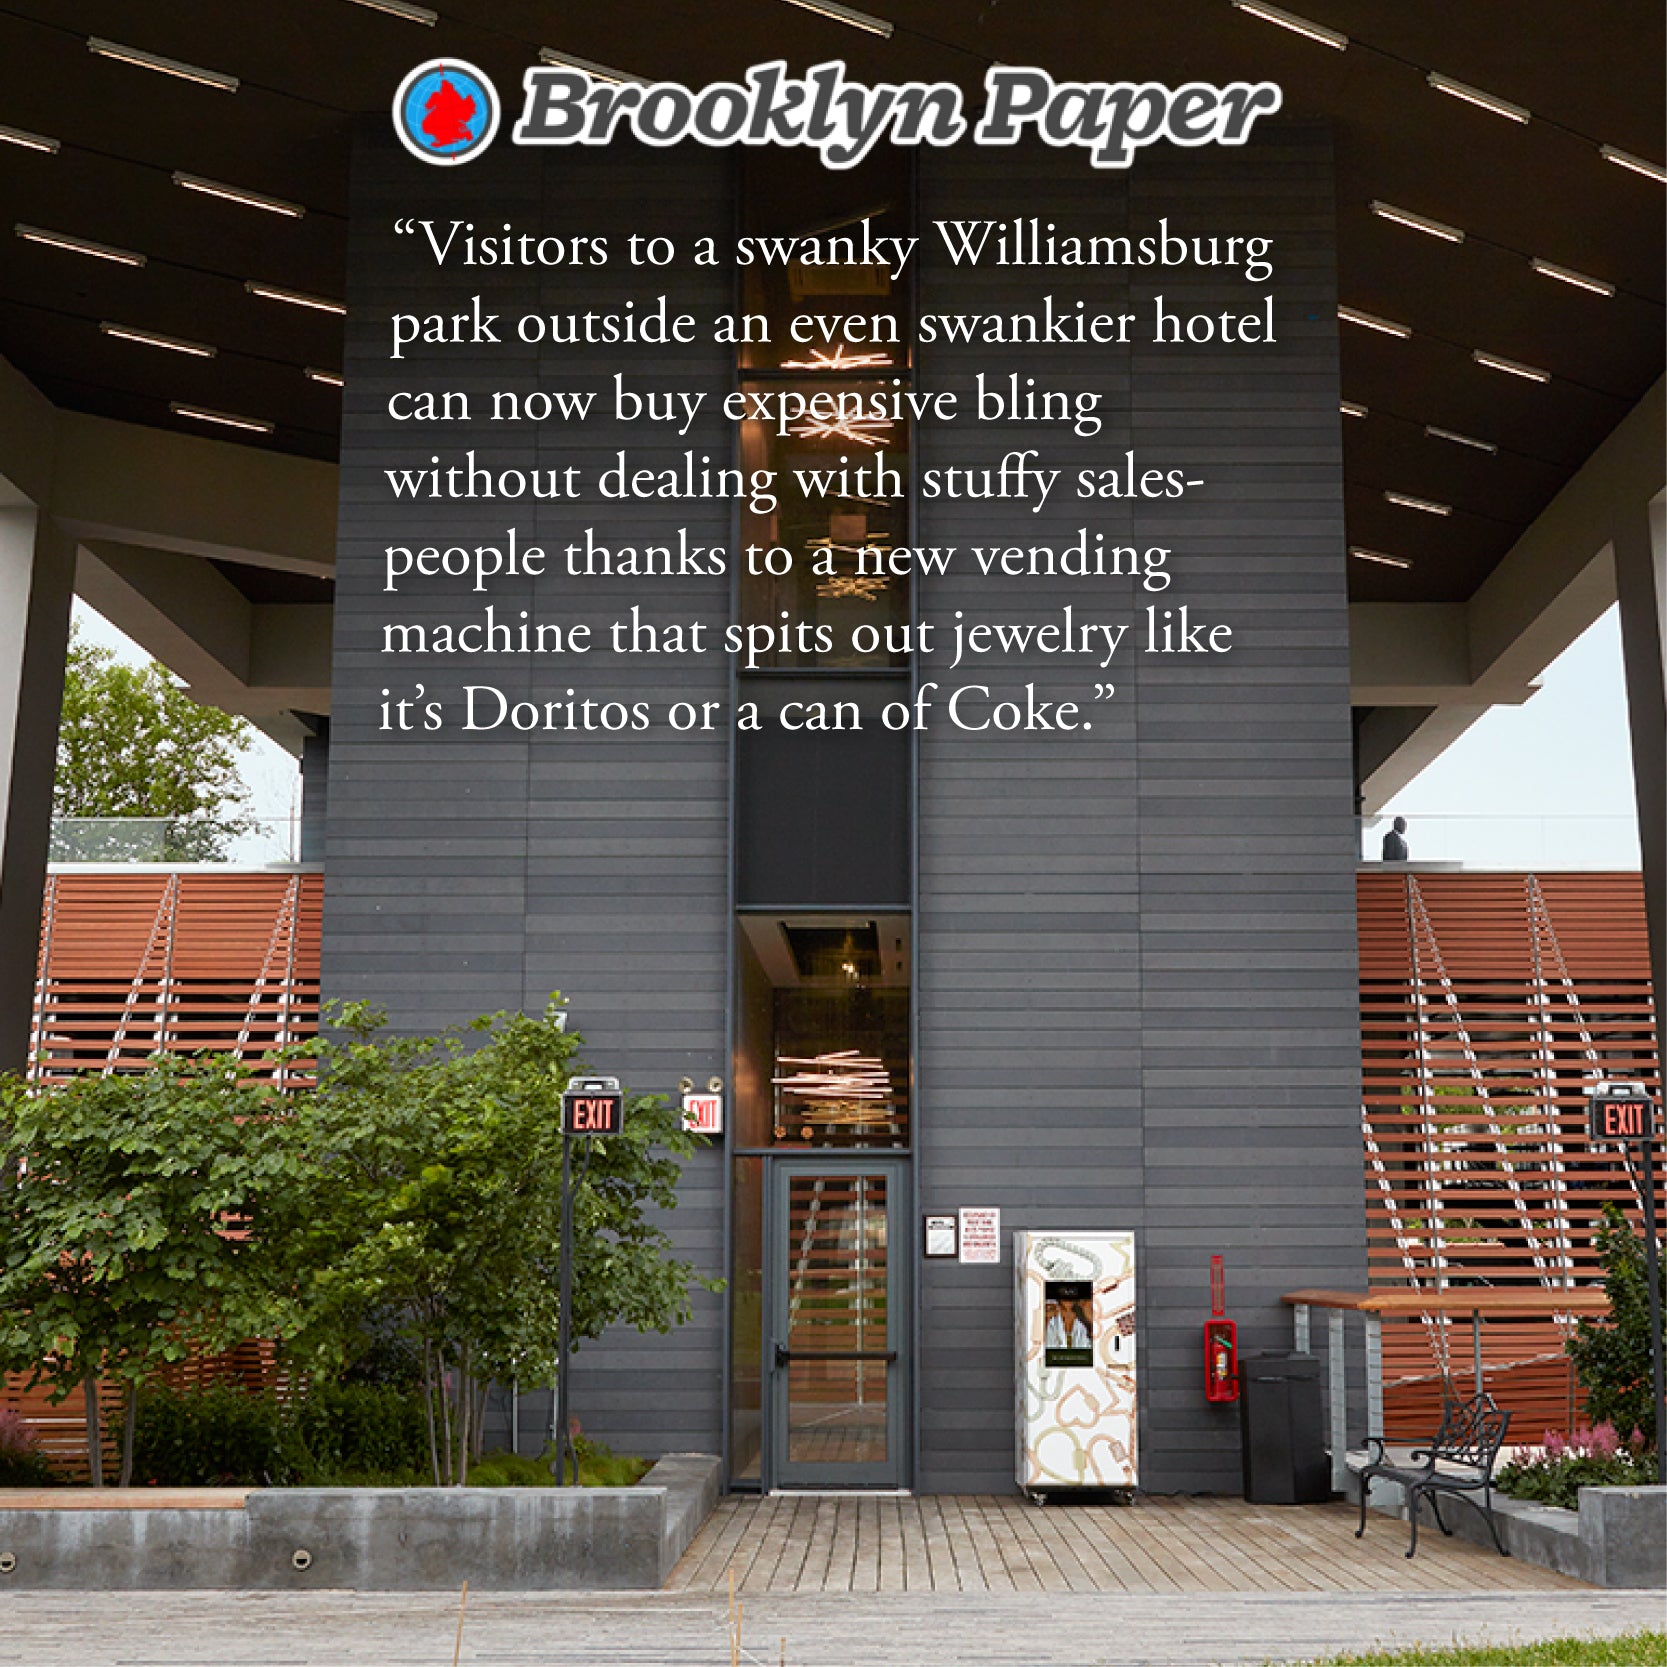 Spare no dispense! High-end vending machine at Williamsburg park sells jewelry for big bucks